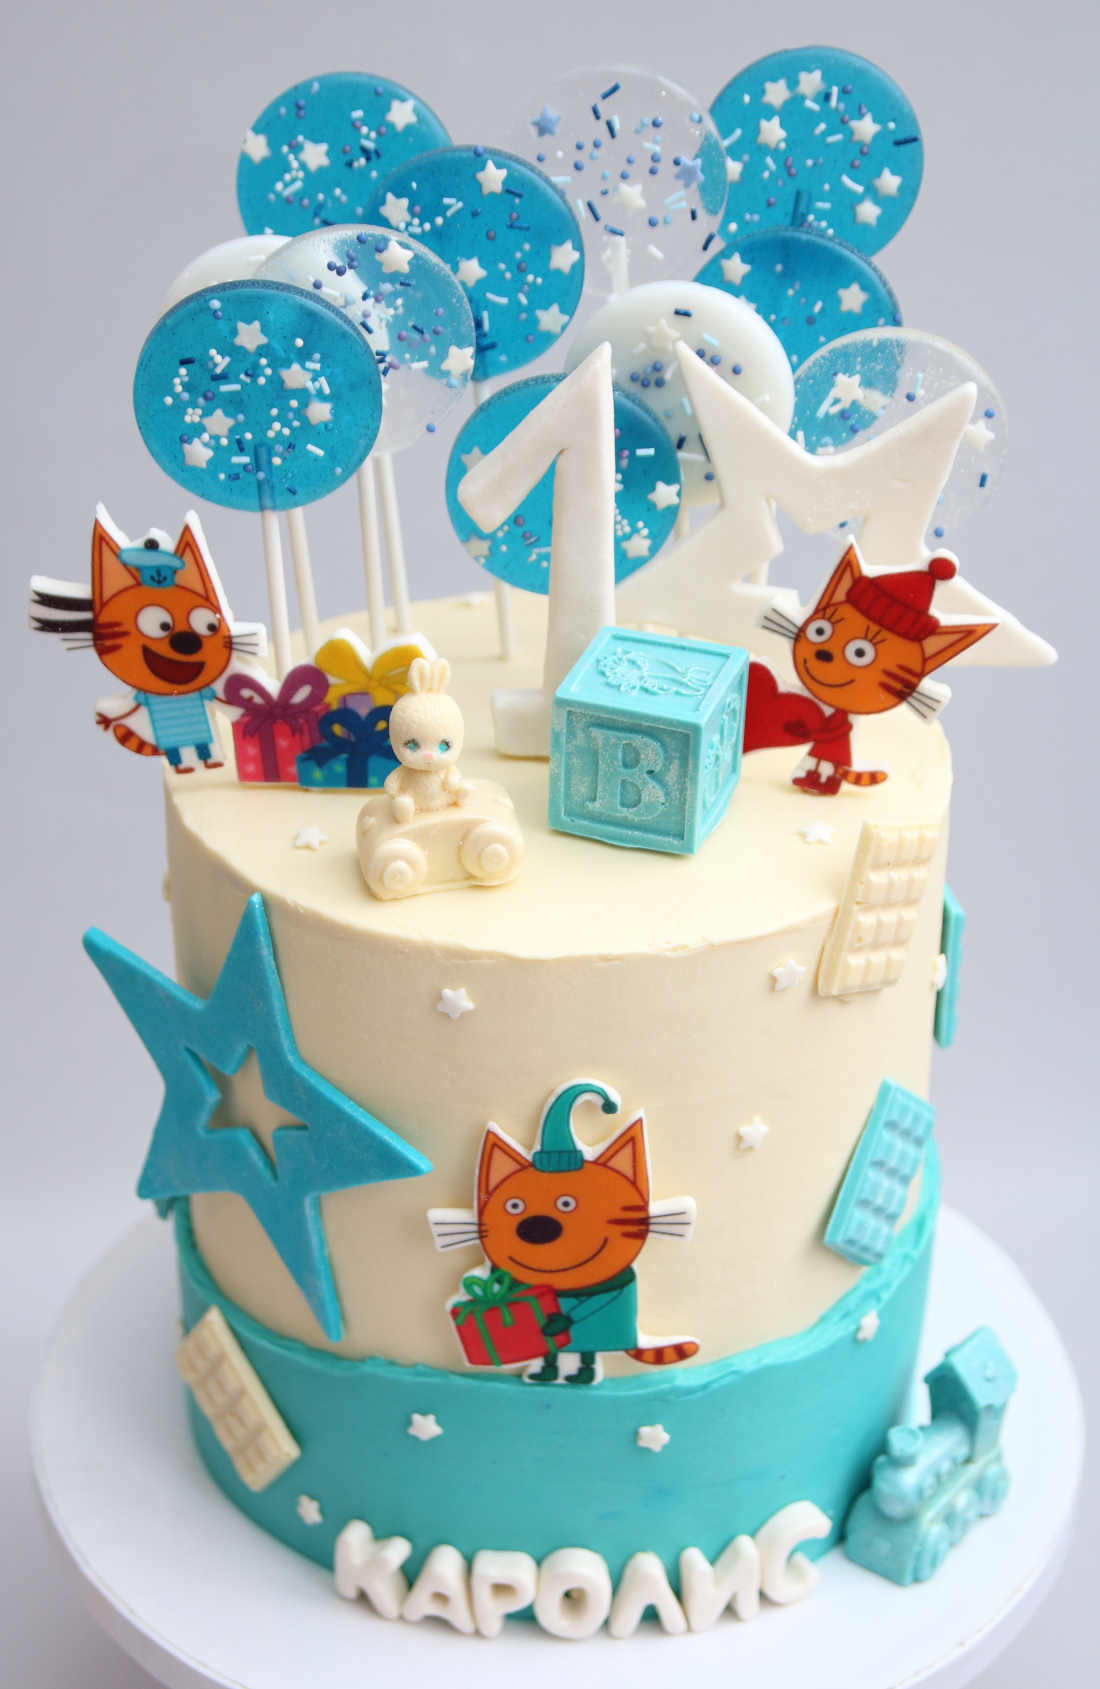 Cake Kid-E-Cats with cartoon characters for a child's birthday